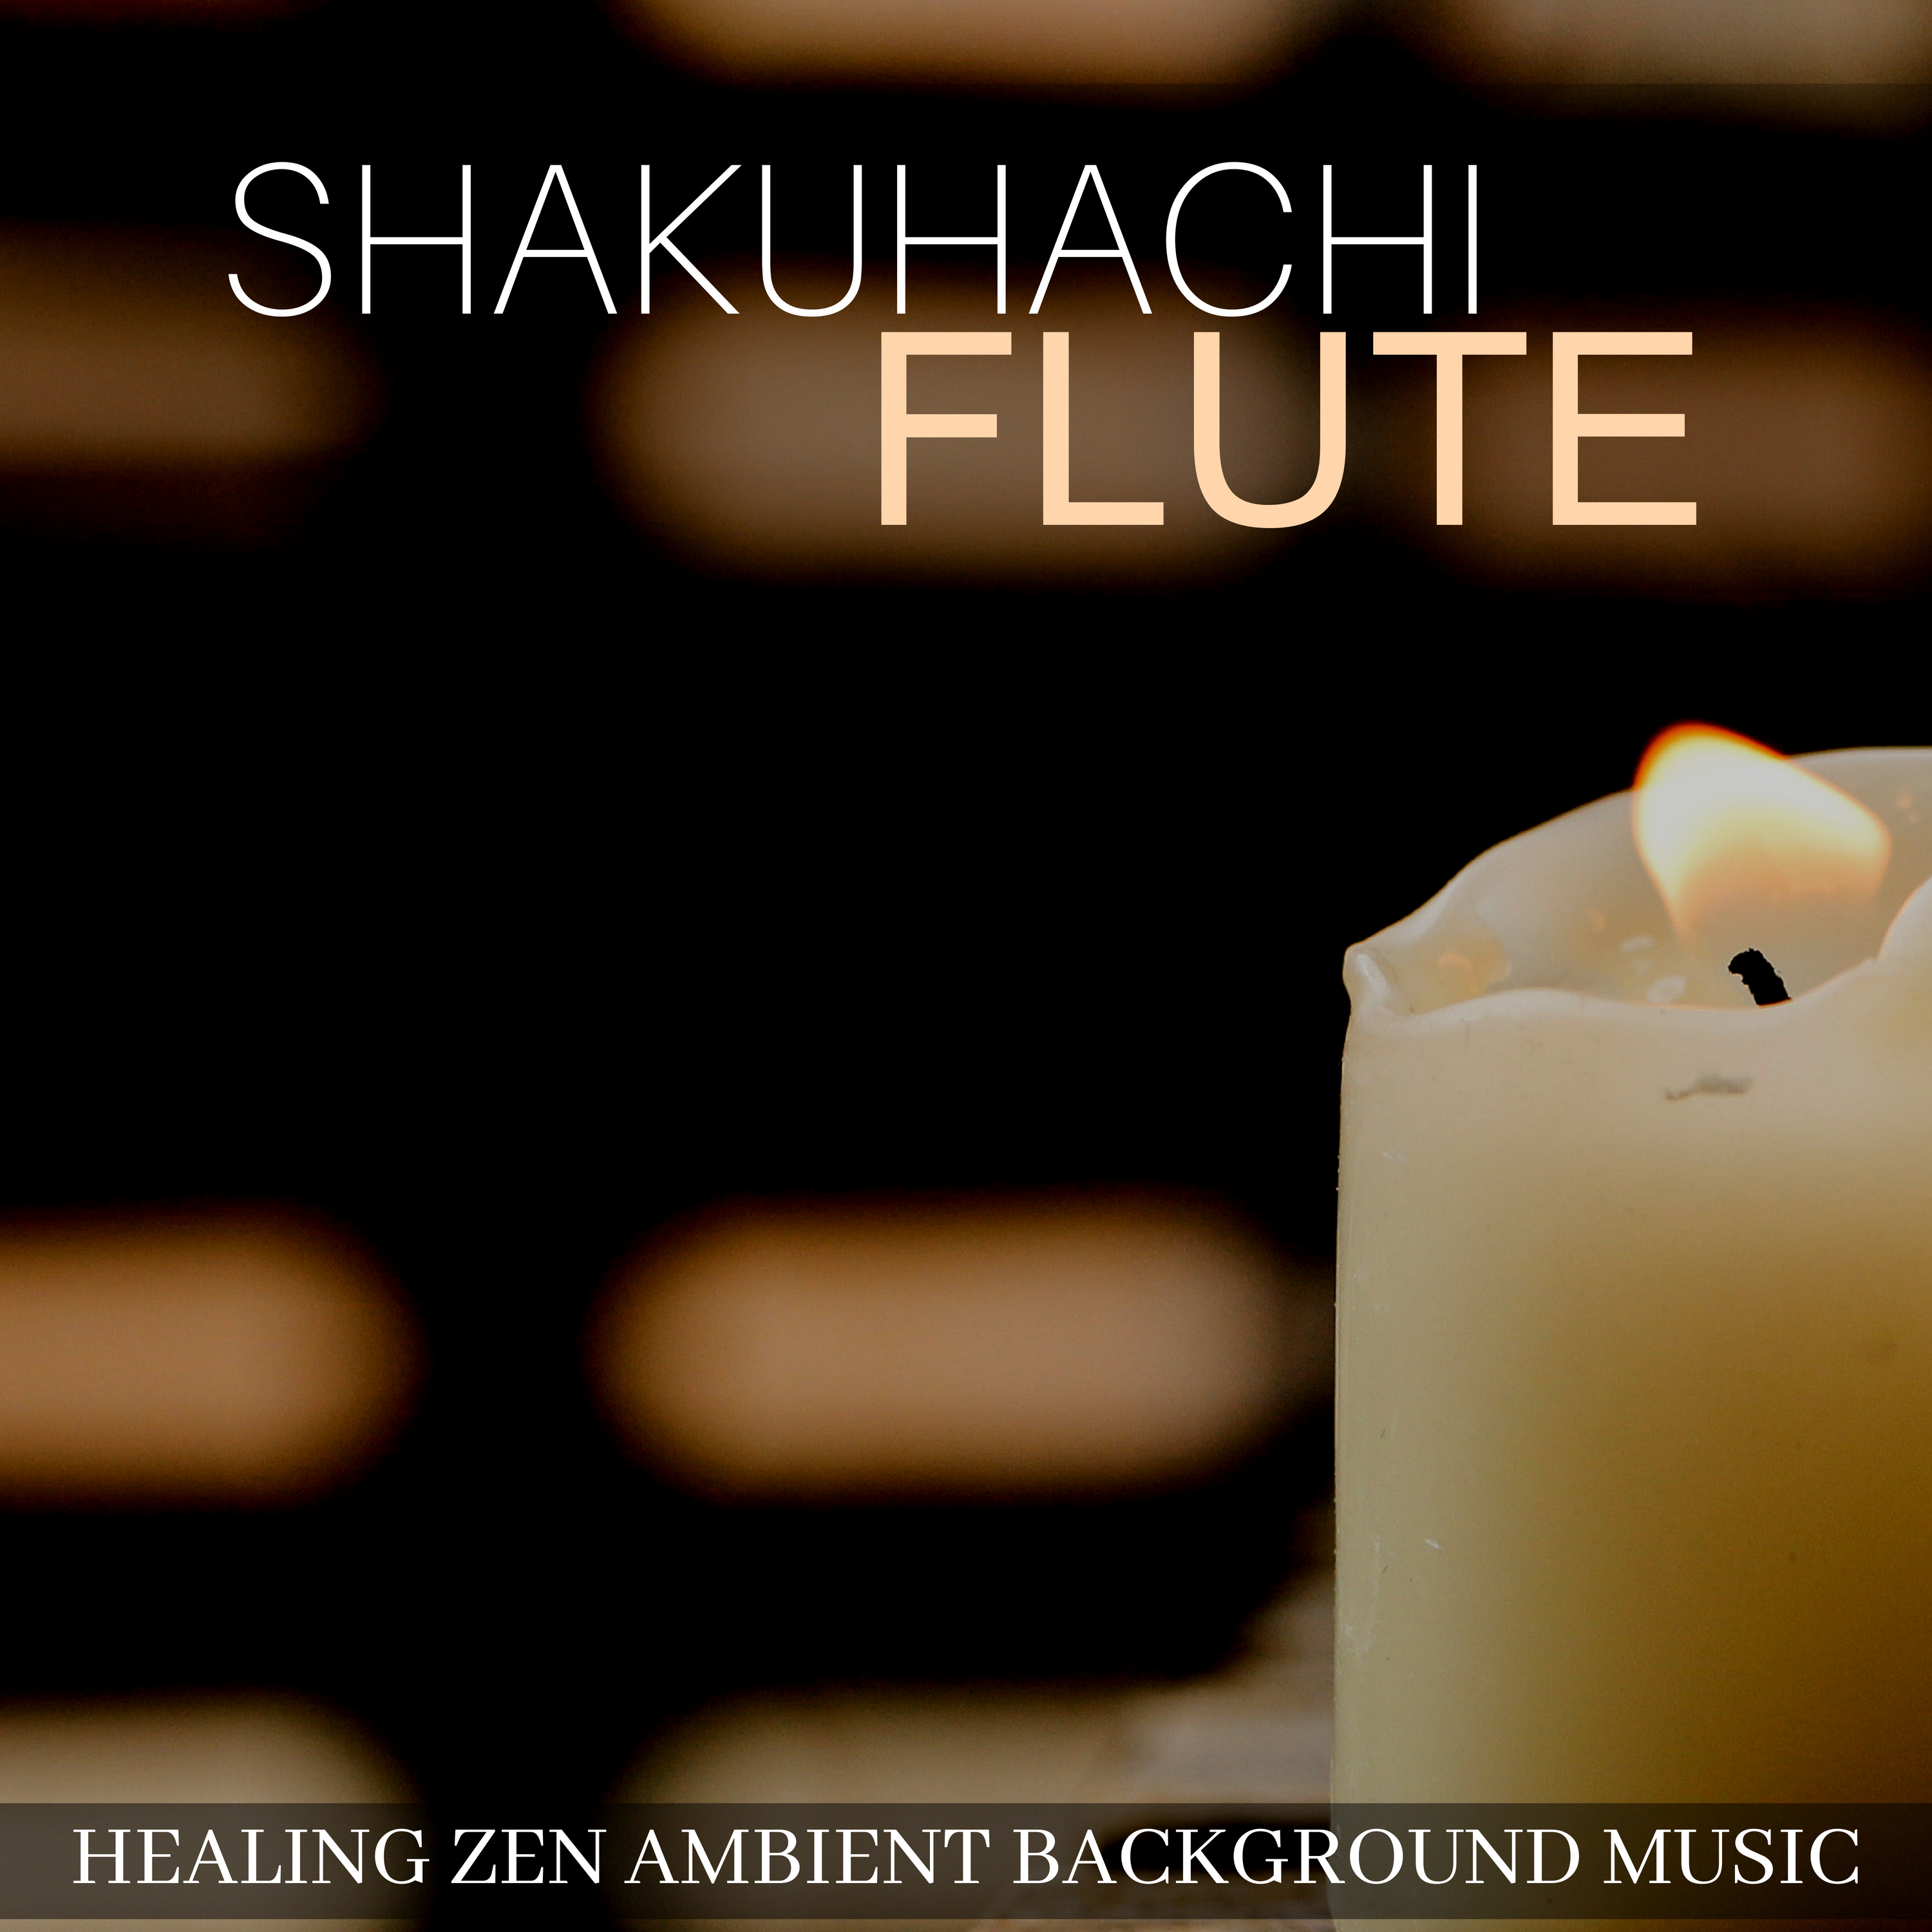 Shakuhachi Flute - Healing Zen Ambient Background Music for Massage, Massotherapy & Spa